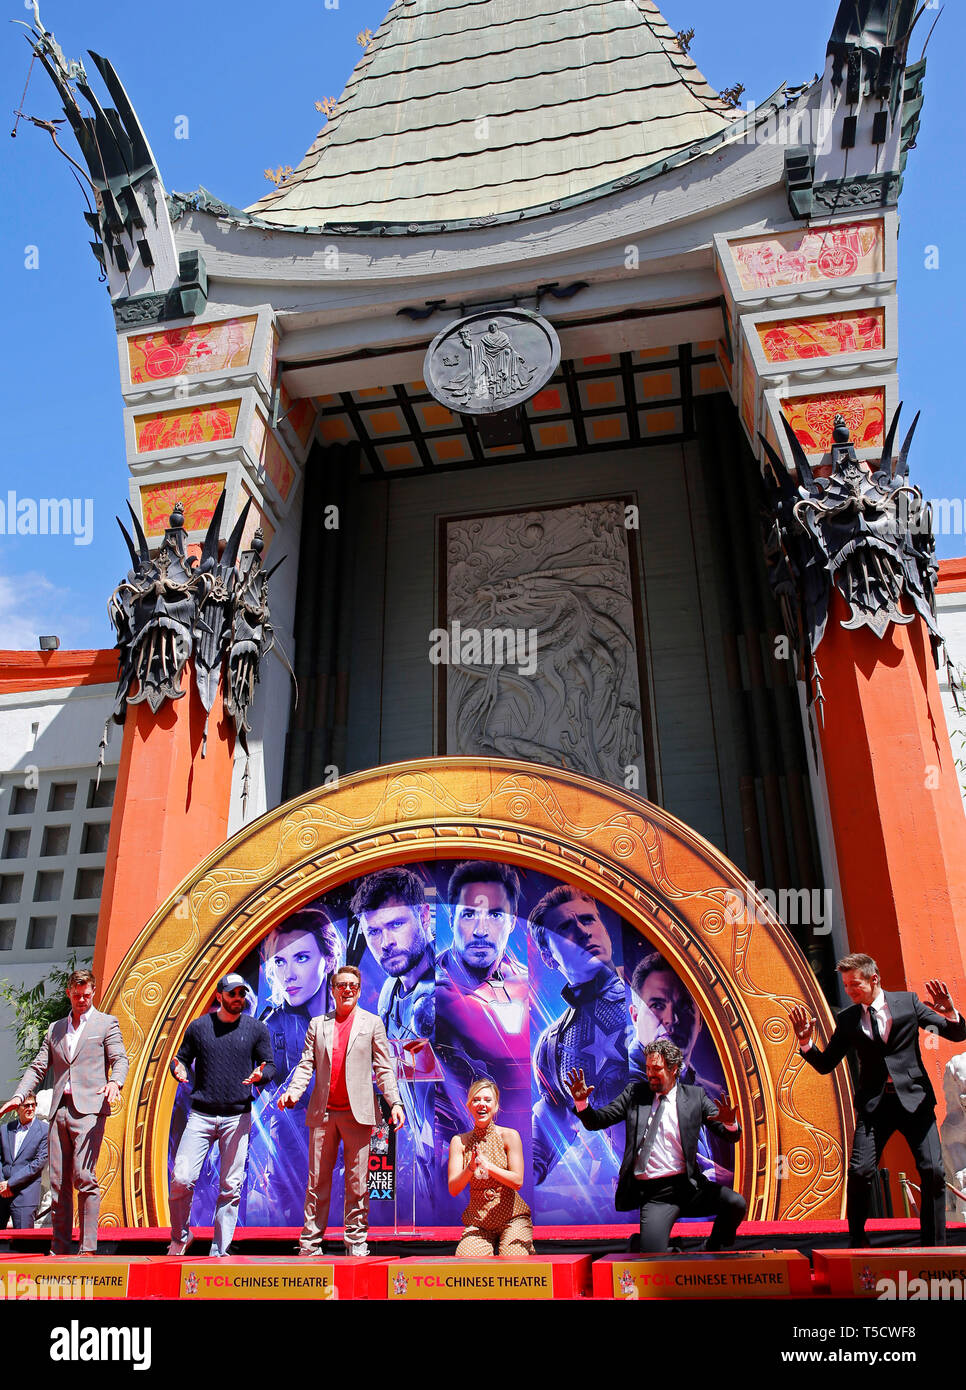 (190424) -- LOS ANGELES, April 24, 2019 (Xinhua) -- Actors Chris Hemsworth, Chris Evans, Robert Downey Jr., actress Scarlett Johansson, actors Mark Ruffalo, Jeremy Renner (From L to R) attend their print ceremony in the forecourt of the TCL Chinese Theater in Los Angeles, the United States, April 23, 2019. The cast of Marvel Studios 'Avengers: Endgame' including Robert Downey Jr., Chris Evans, Mark Ruffalo, Chris Hemsworth, Scarlett Johansson, and Jeremy Renner, along with Marvel Studios President Kevin Feige, received one of Hollywood's oldest accolades this Tuesday, to sign their names and p Stock Photo